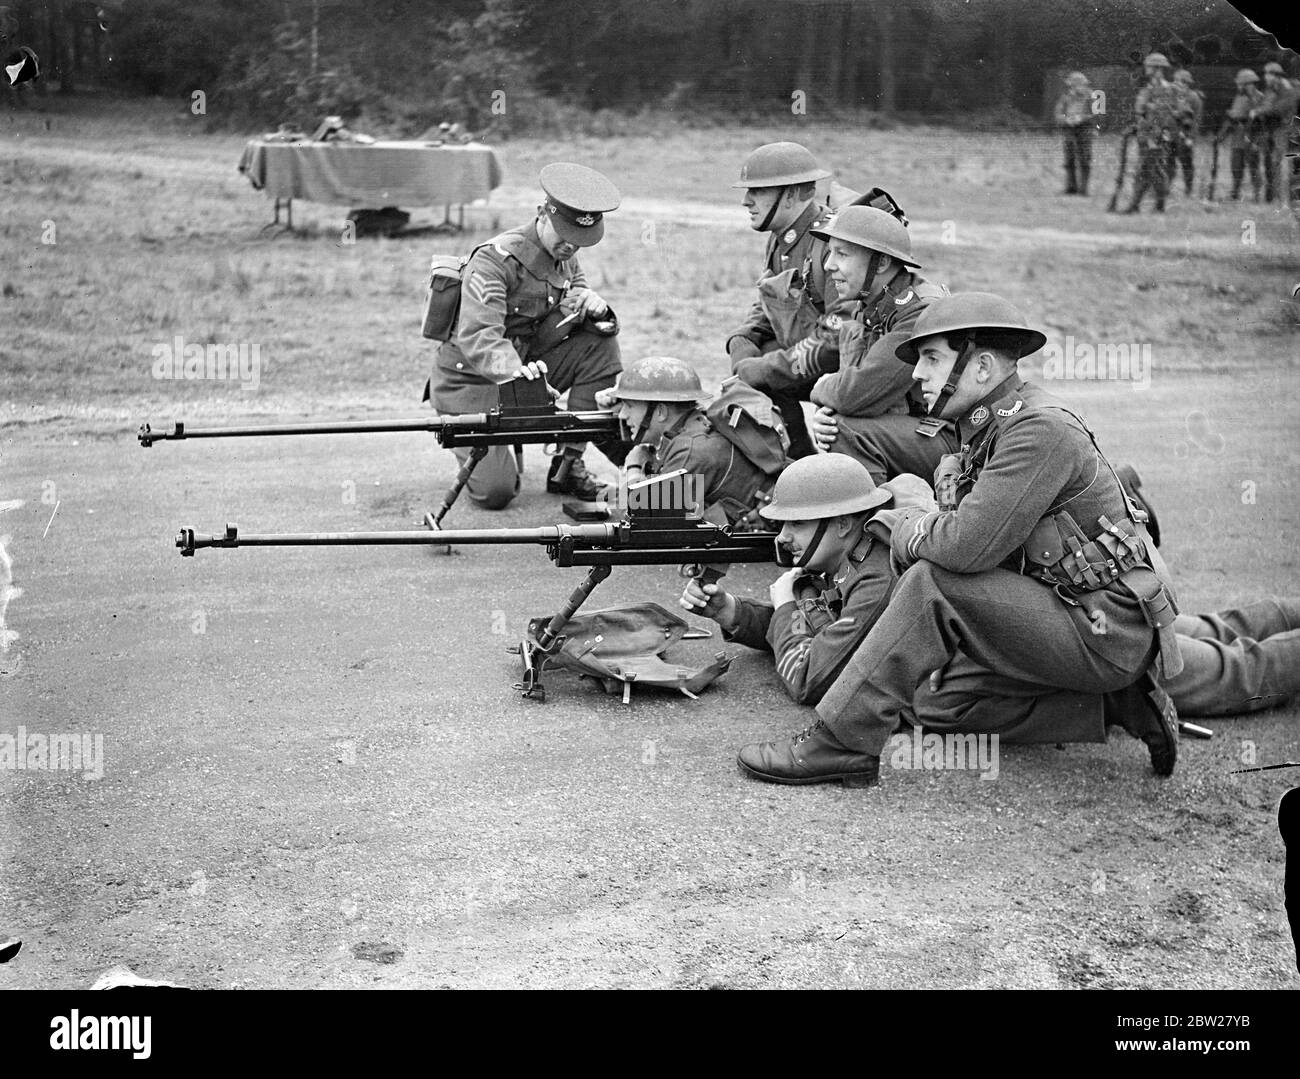 New anti-tank rifle at Aldershot demonstration. Latest equipment and training of the infantry detachments of the British Army were demonstrated by the 1st Battlalion the South Staffordshire Regiment in a series of exercises at Aldershot camp, Hampshire. Photo shows, the 'Boys Anti-Tank Rifle' being demonstrated. The rifle is .55 and the magazine holds five rounds. 21 January 1938 Stock Photo